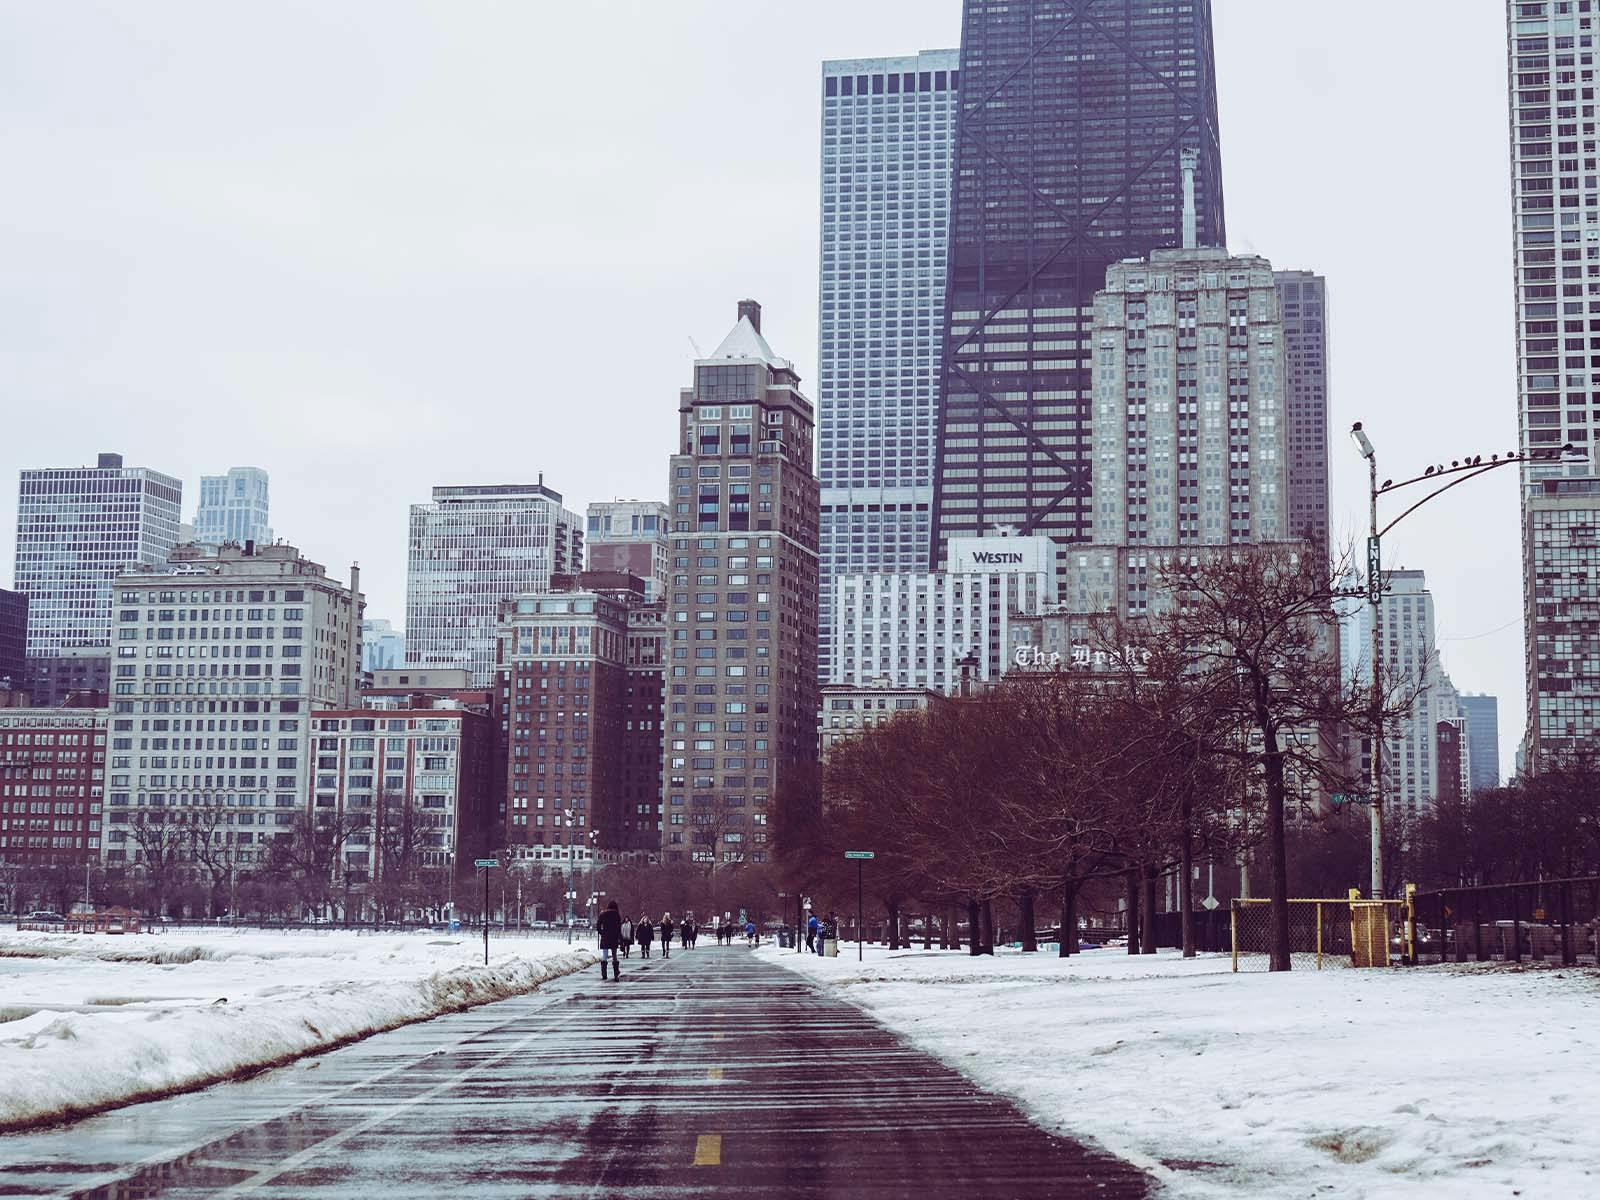 EVA’s Top 5 Things to Do and See During Chicago Winter